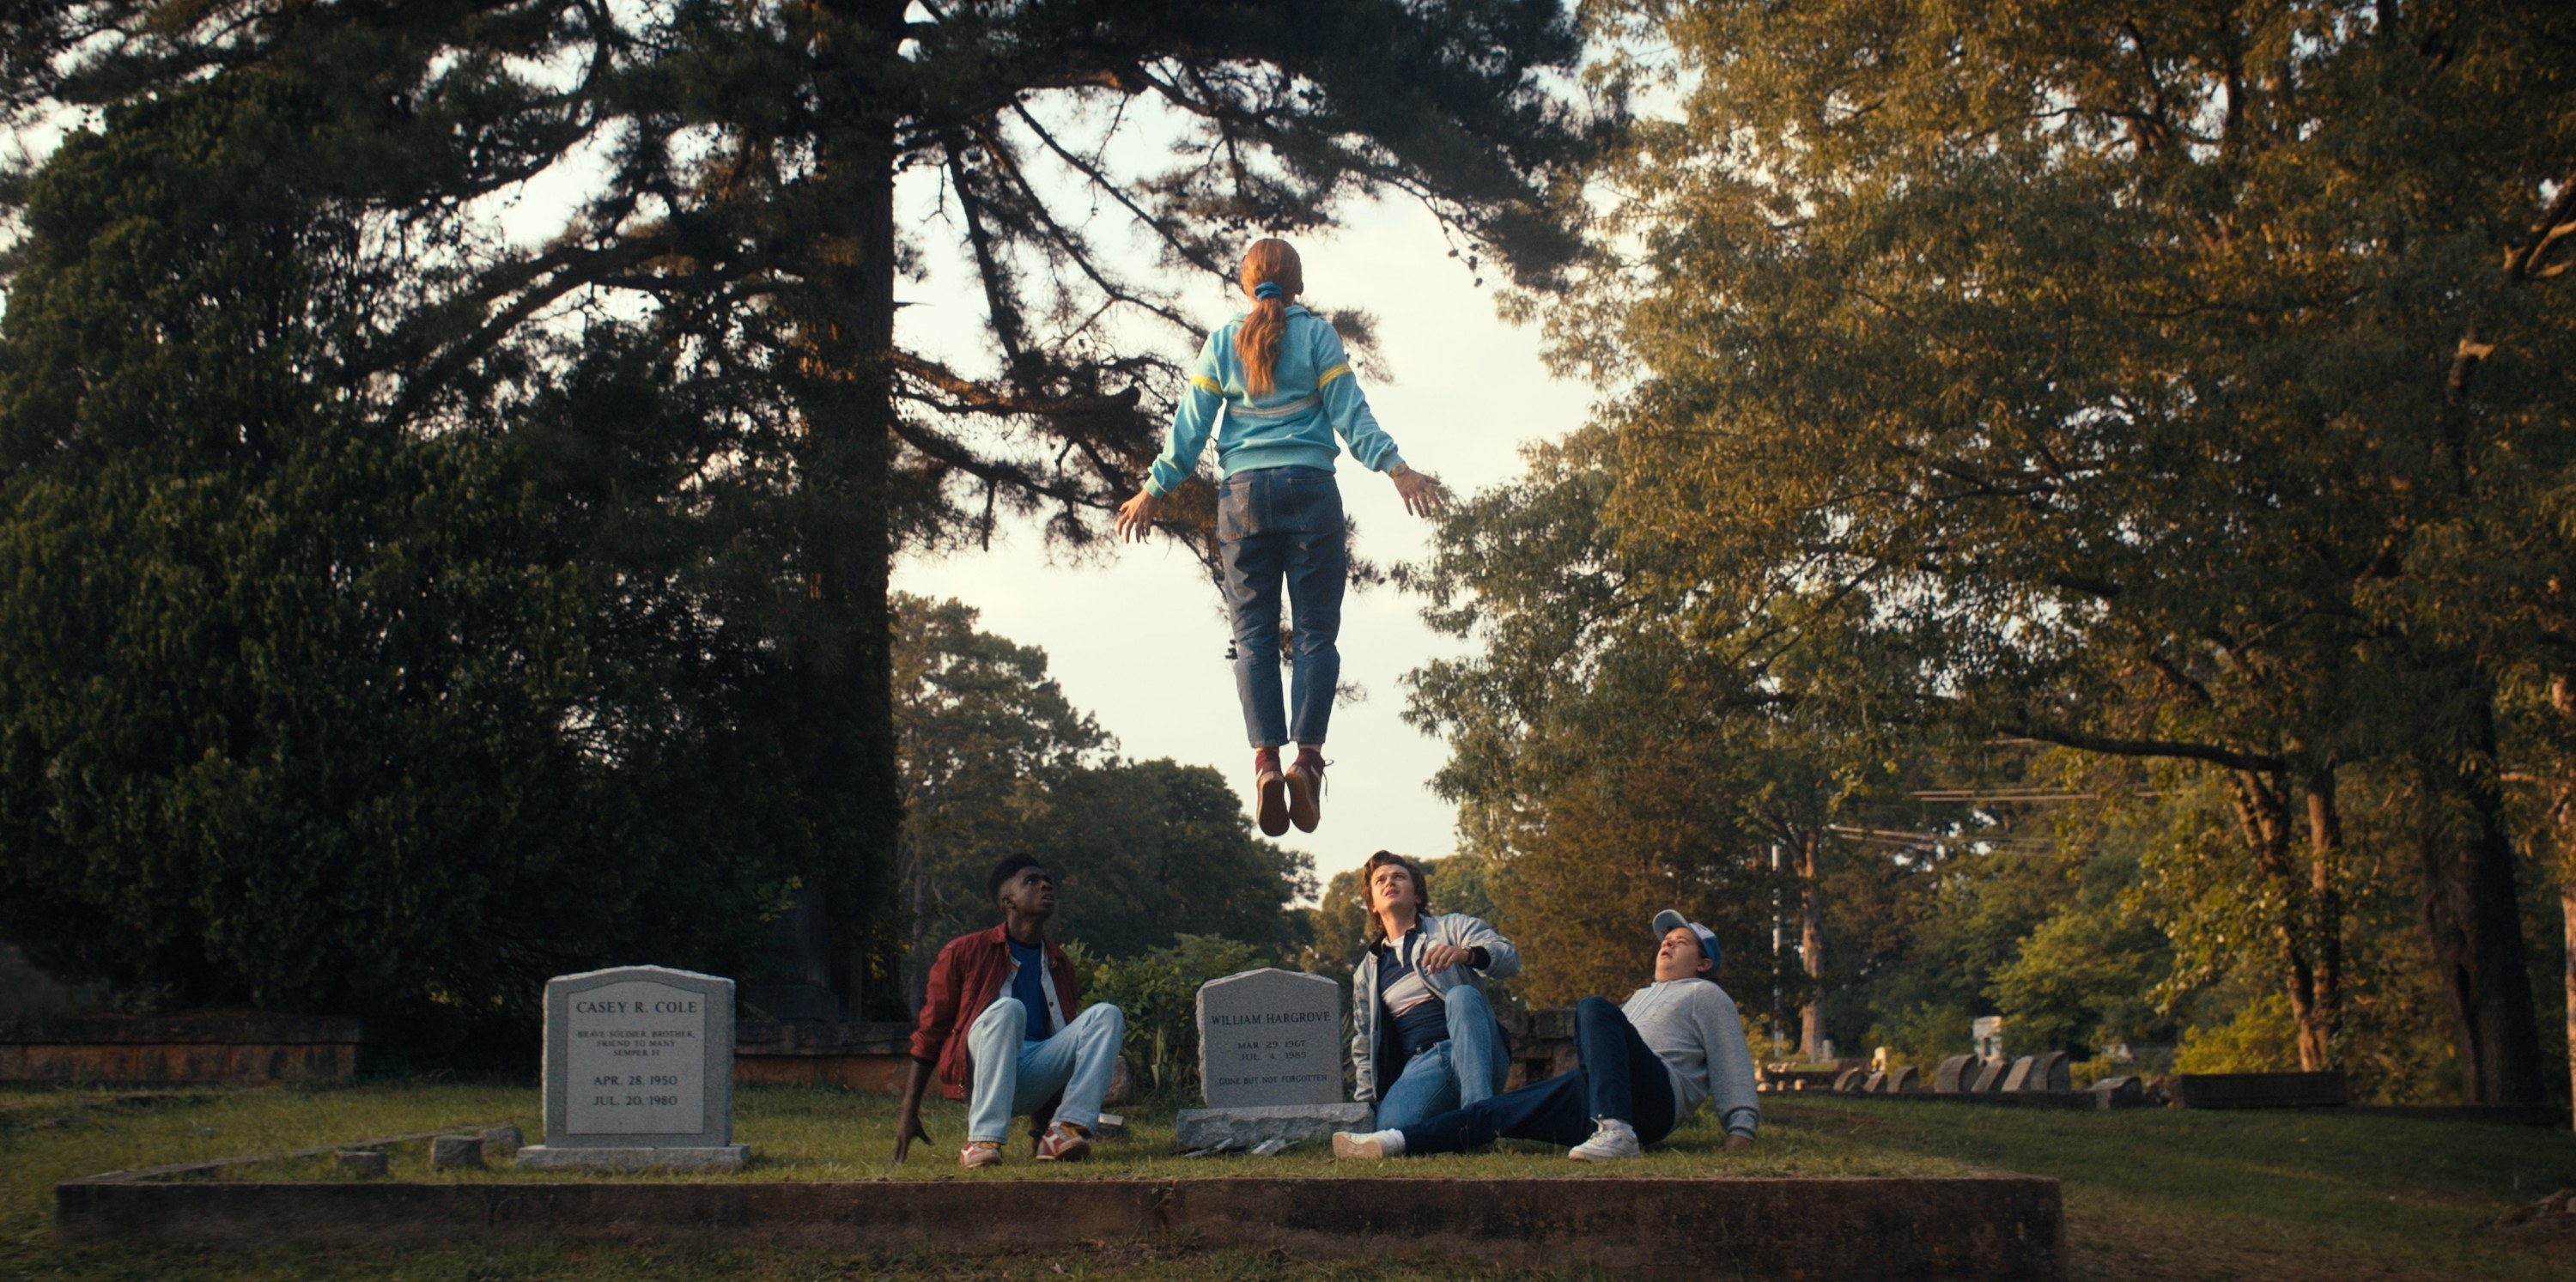 Max suspended in the air in a cemetery